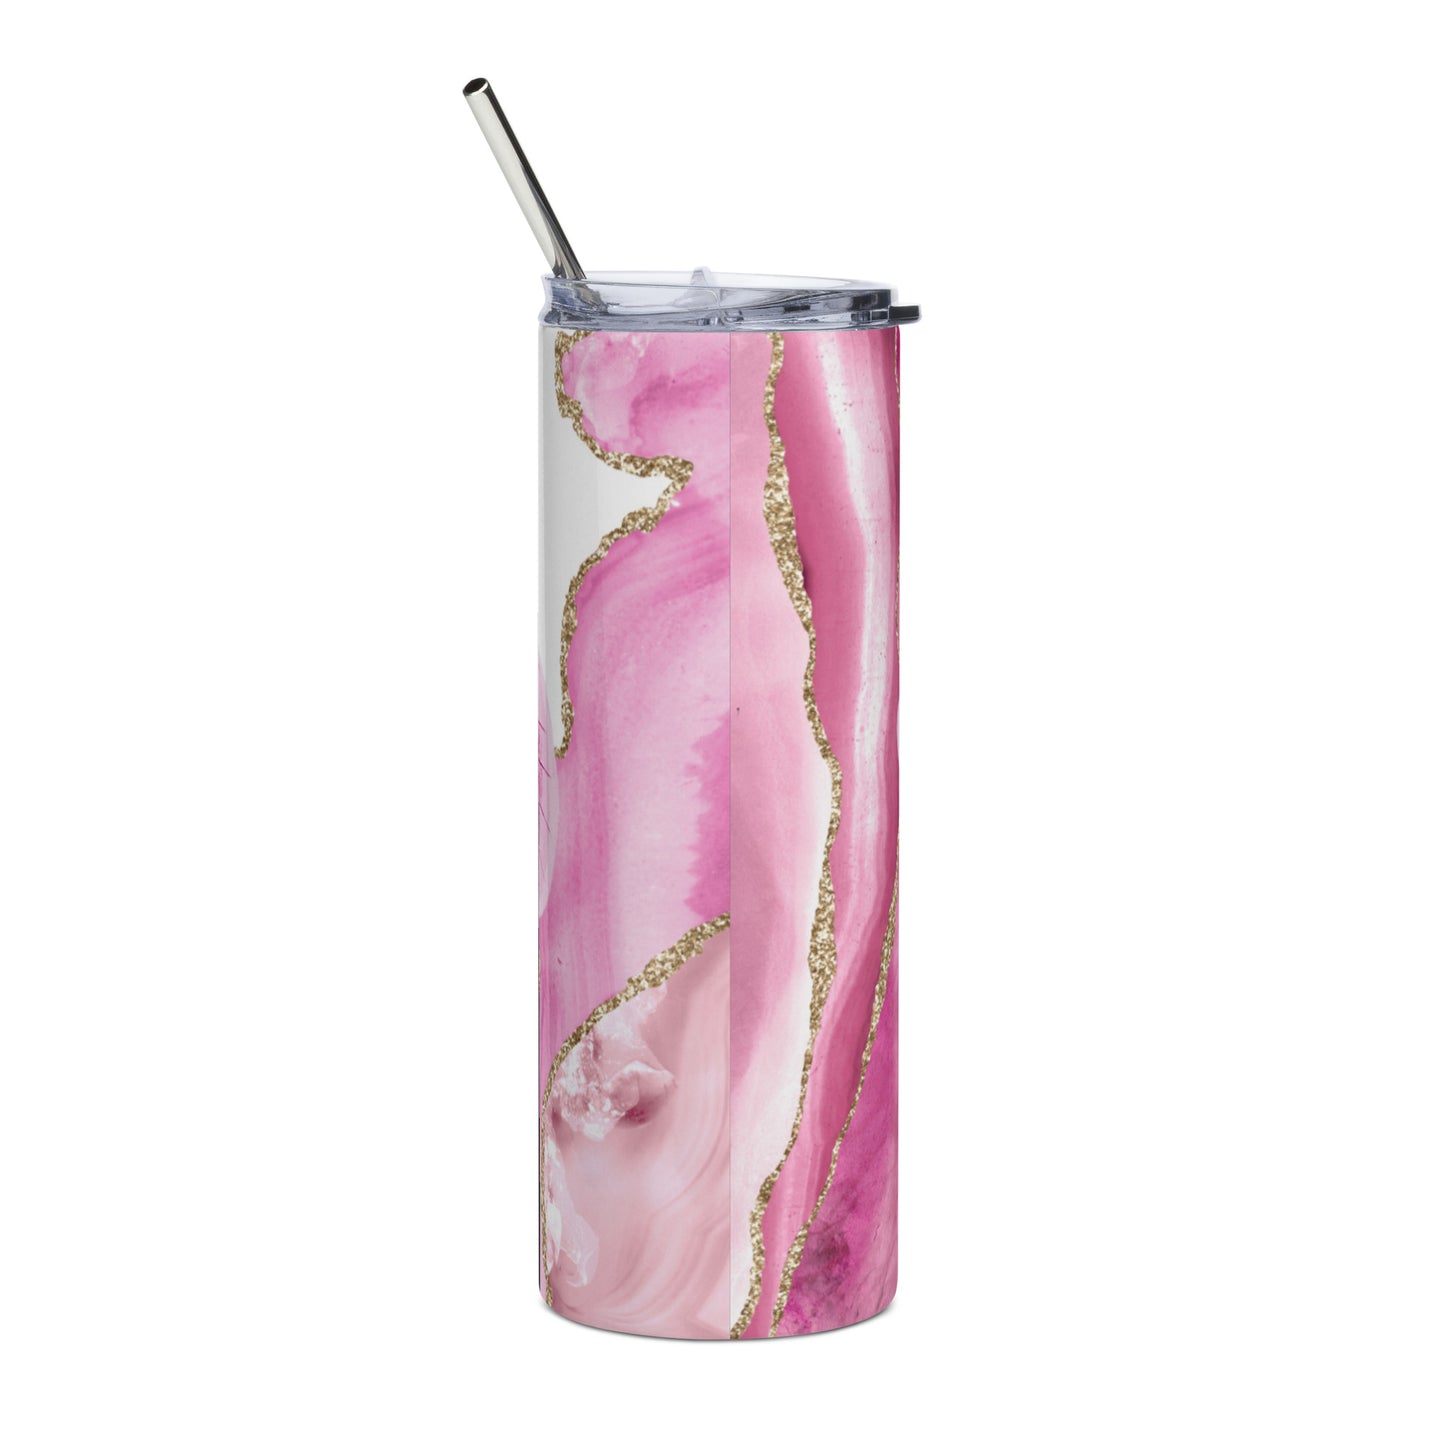 Stainless Steel Tumbler - Pink and Glitter Gold - KNOW YOUR WORTH